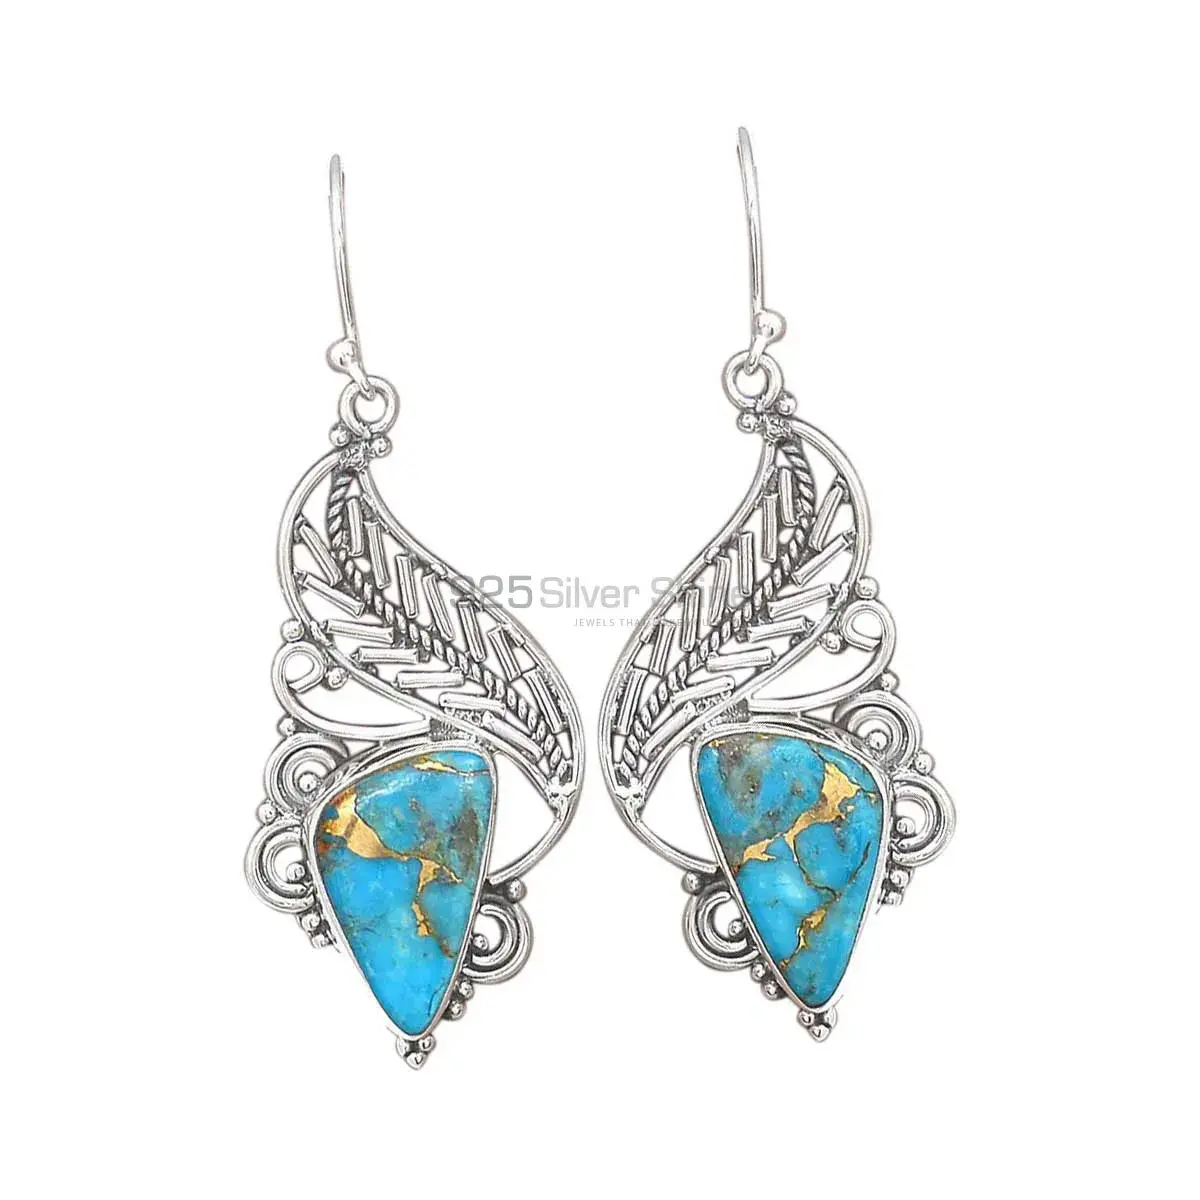 Fine 925 Sterling Silver Earrings In Natural Turquoise Gemstone 925SE2970